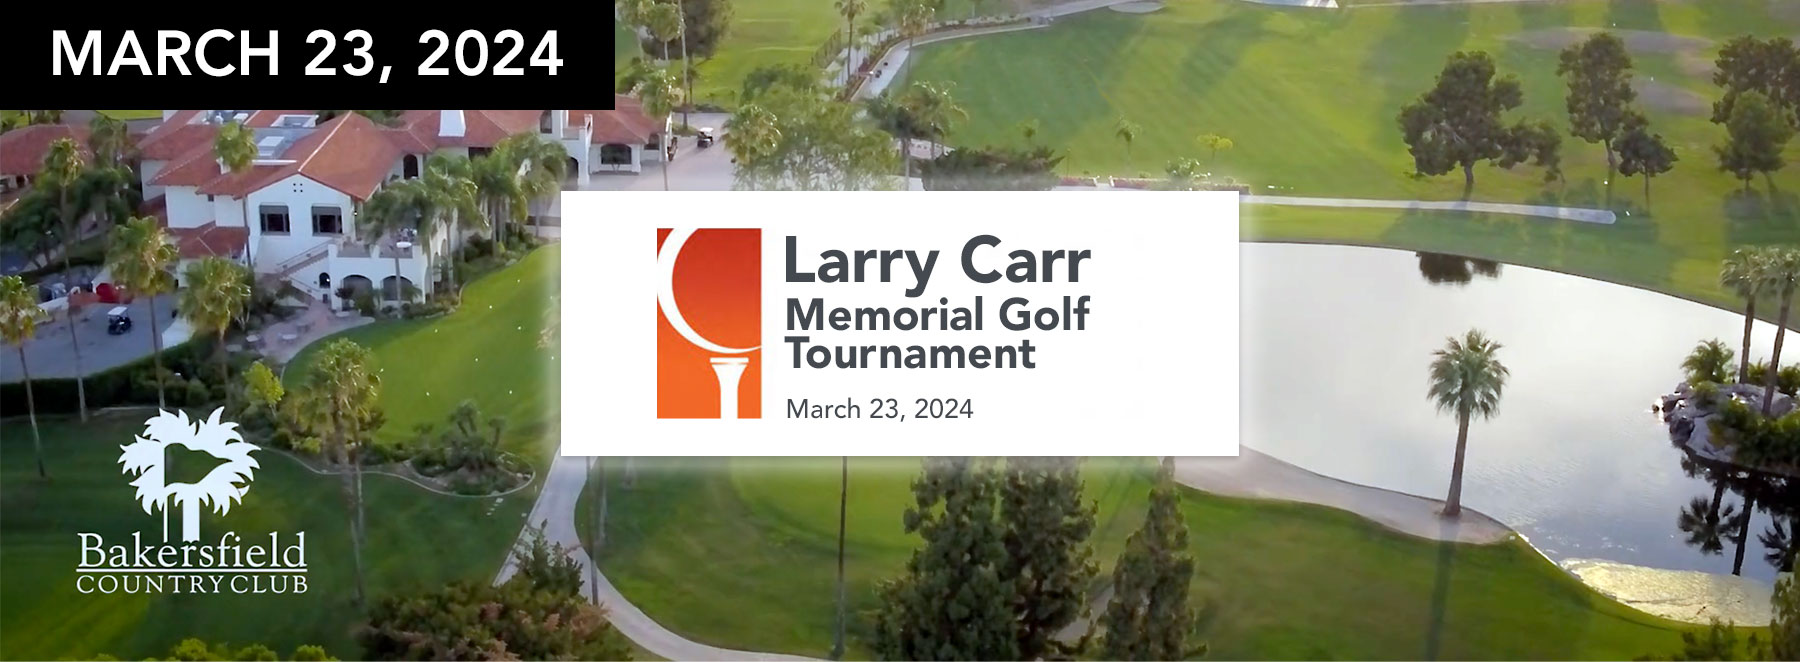 Bakersfield Country Club with text for Larry Carr Memorial Golf Tournament 2024